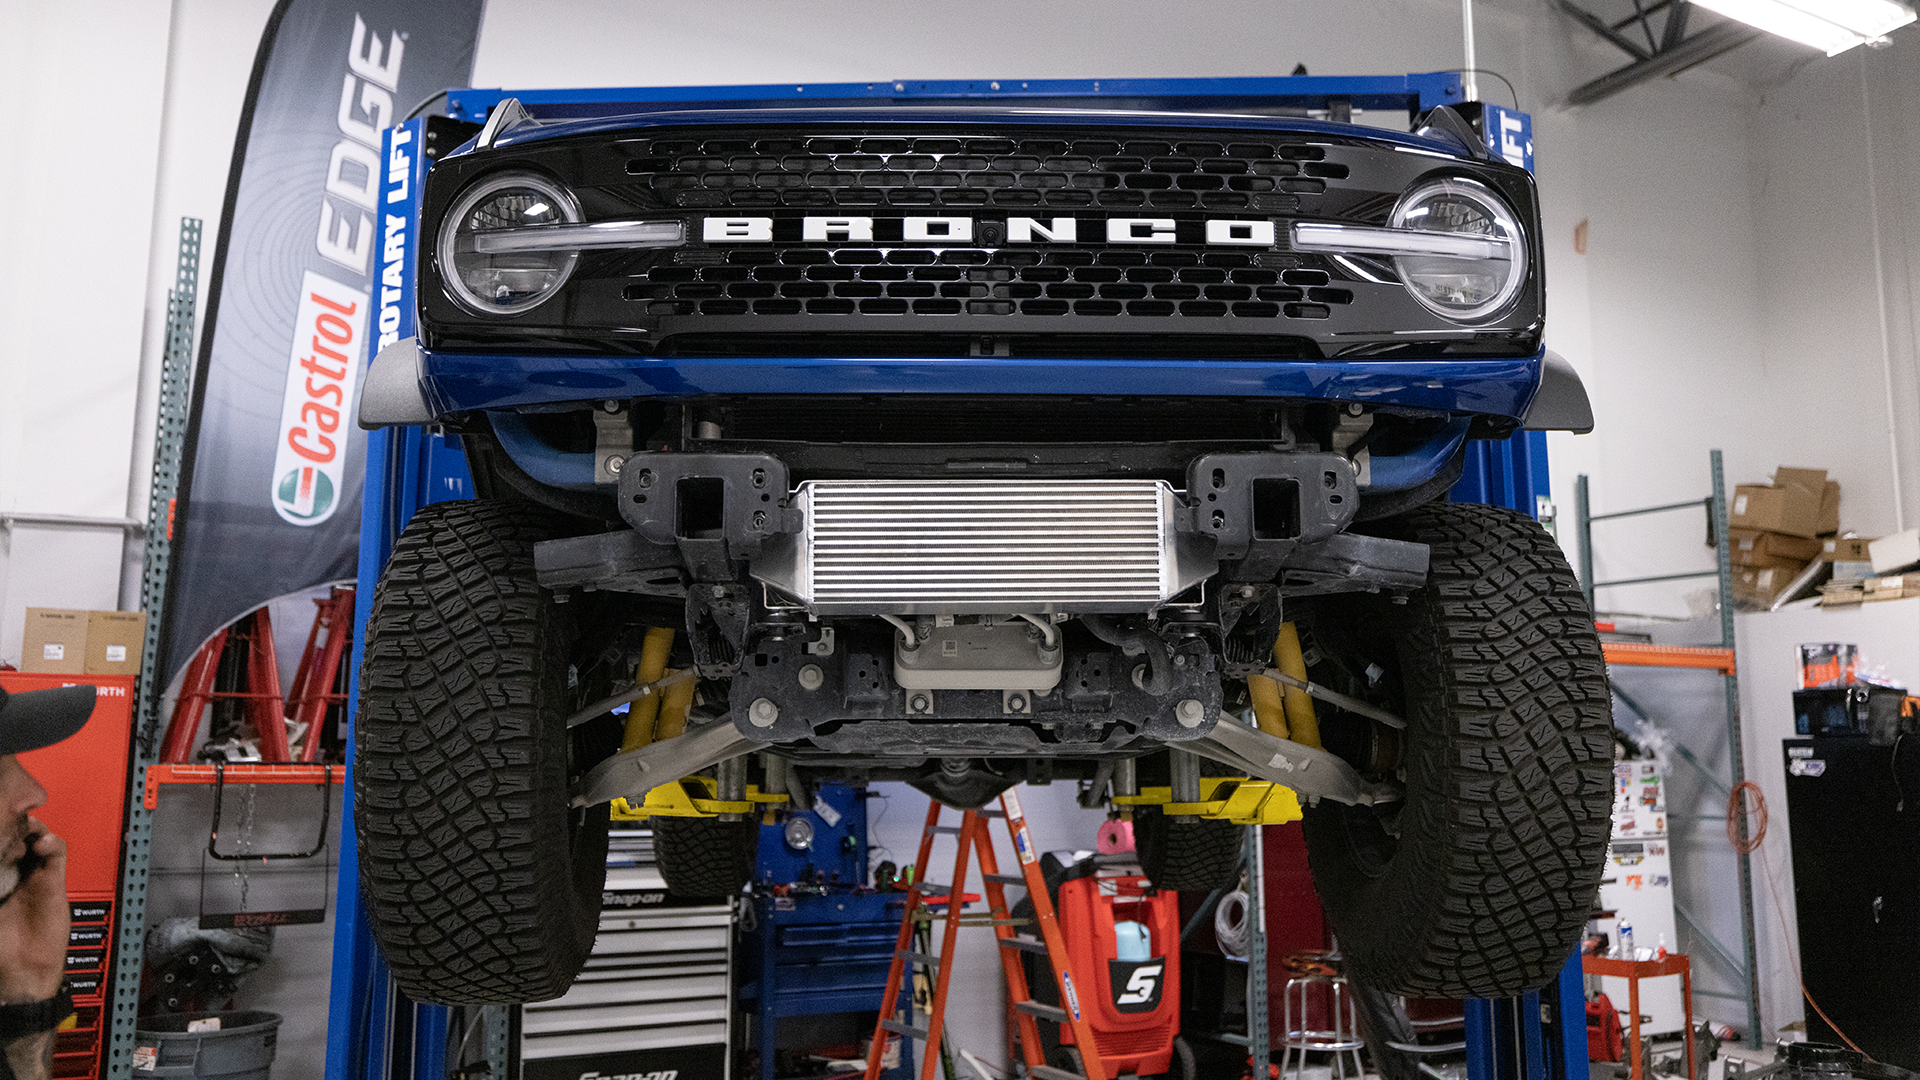 Ford Bronco Whipple Superchargers' Intercooler for the Bronco! Available now, here at Lethal Performance! bronc 1